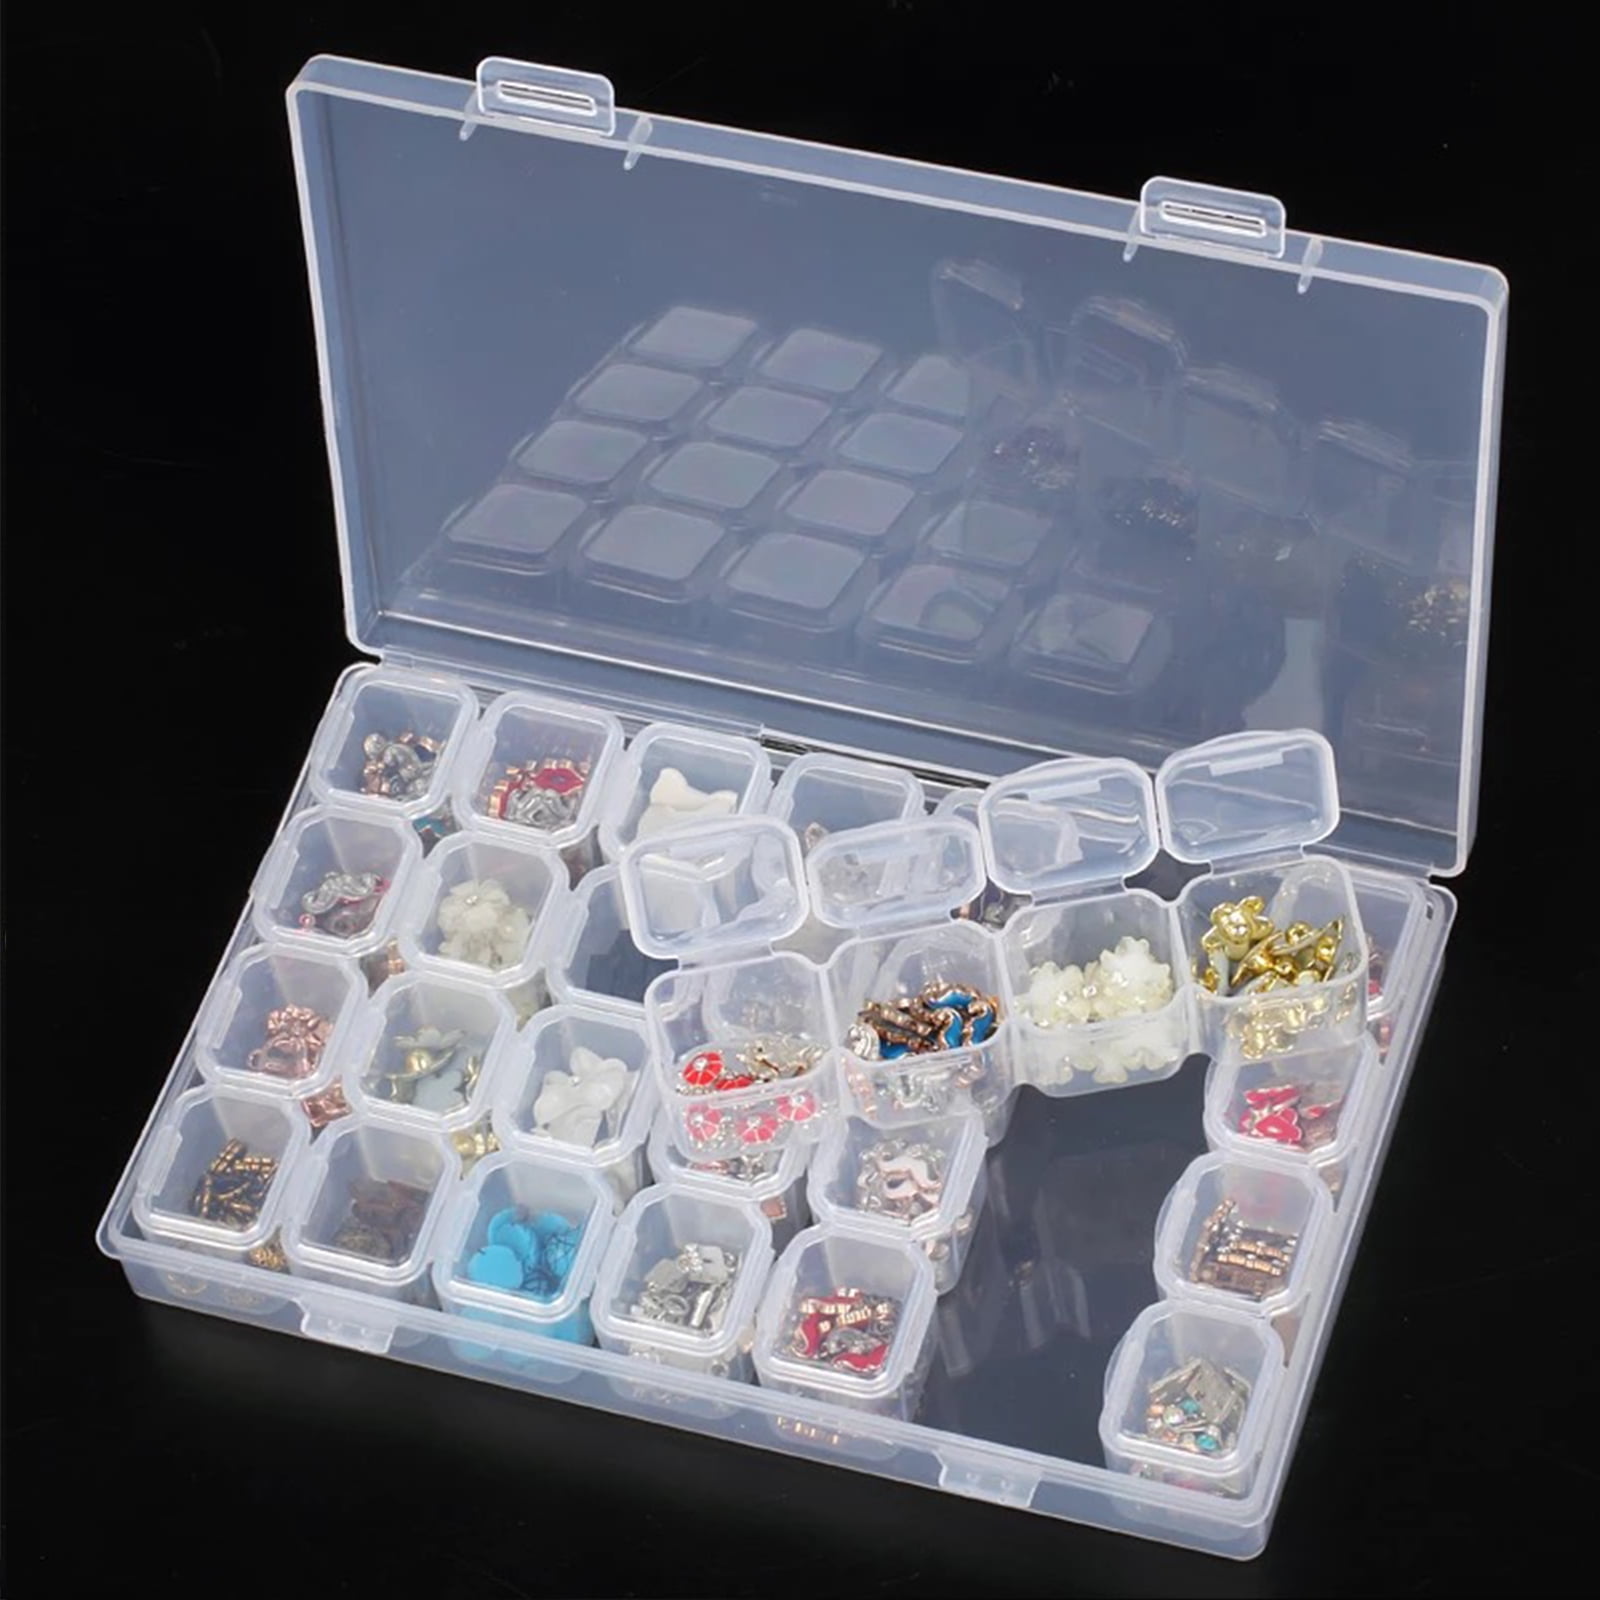 Diamond Press Craft Storage Box with Dividers and Pockets - 20268323